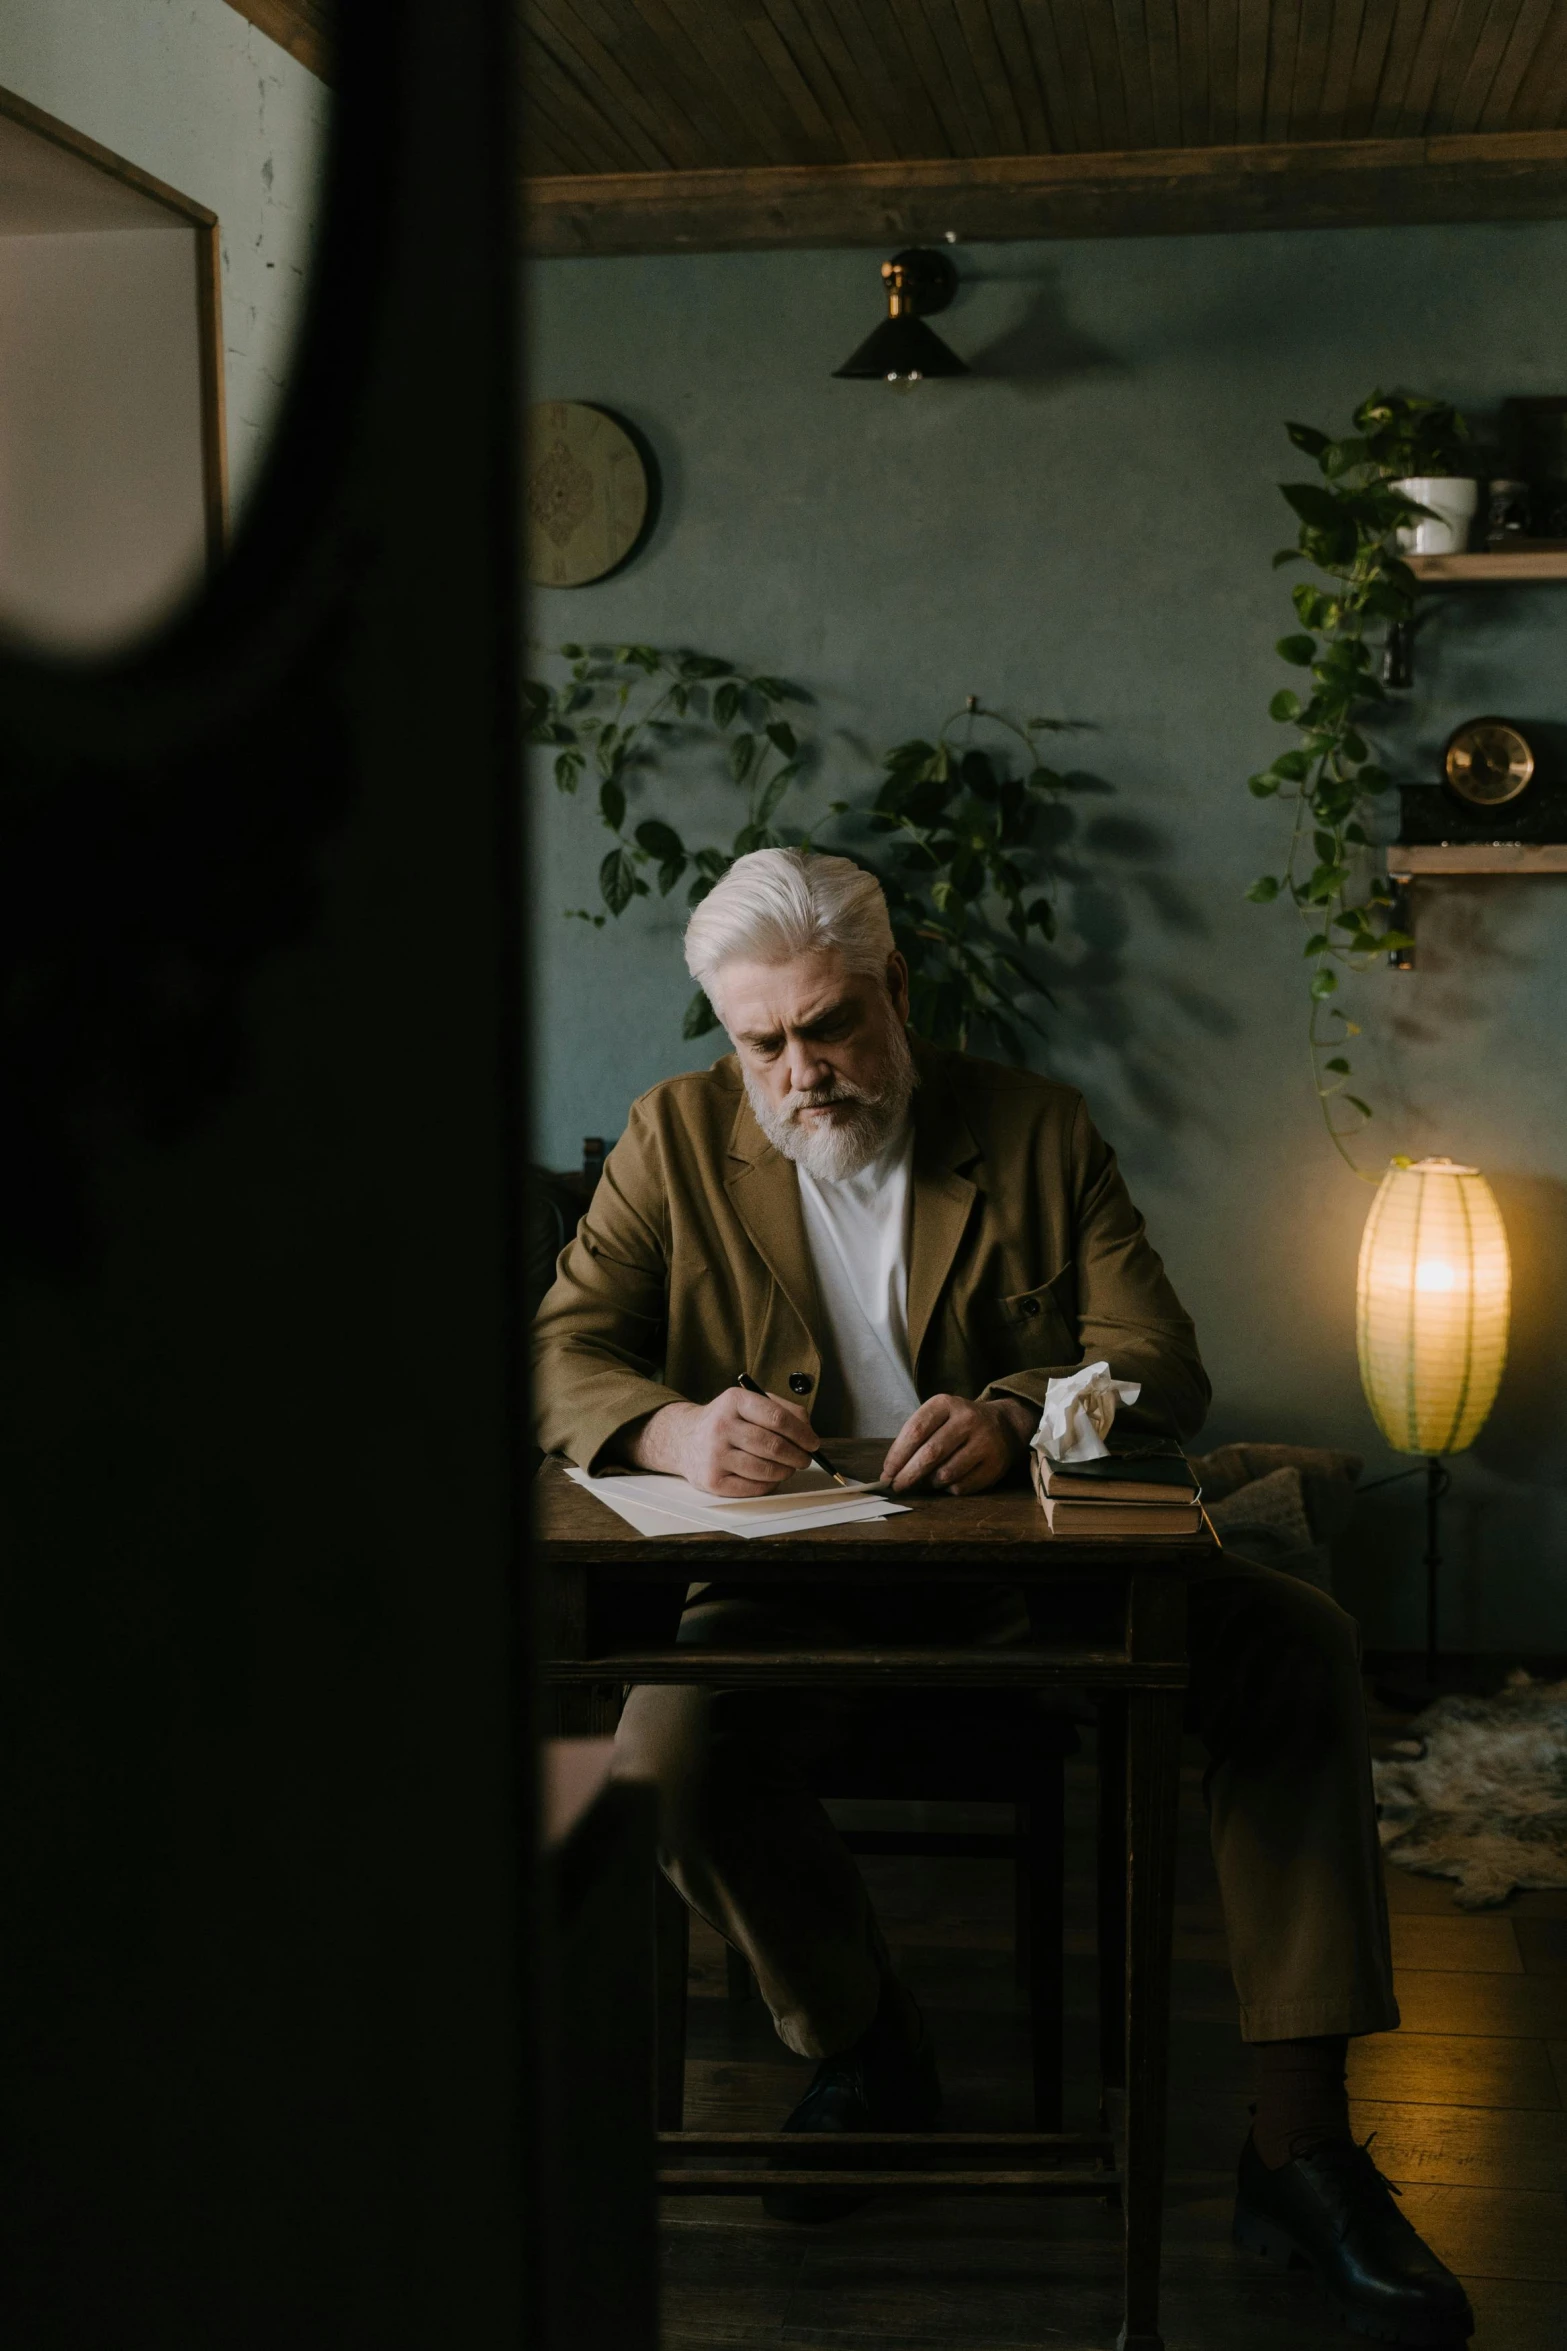 a man sitting at a table writing on a piece of paper, silver hair and beard, jovana rikalo, high quality photo, abcdefghijklmnopqrstuvwxyz